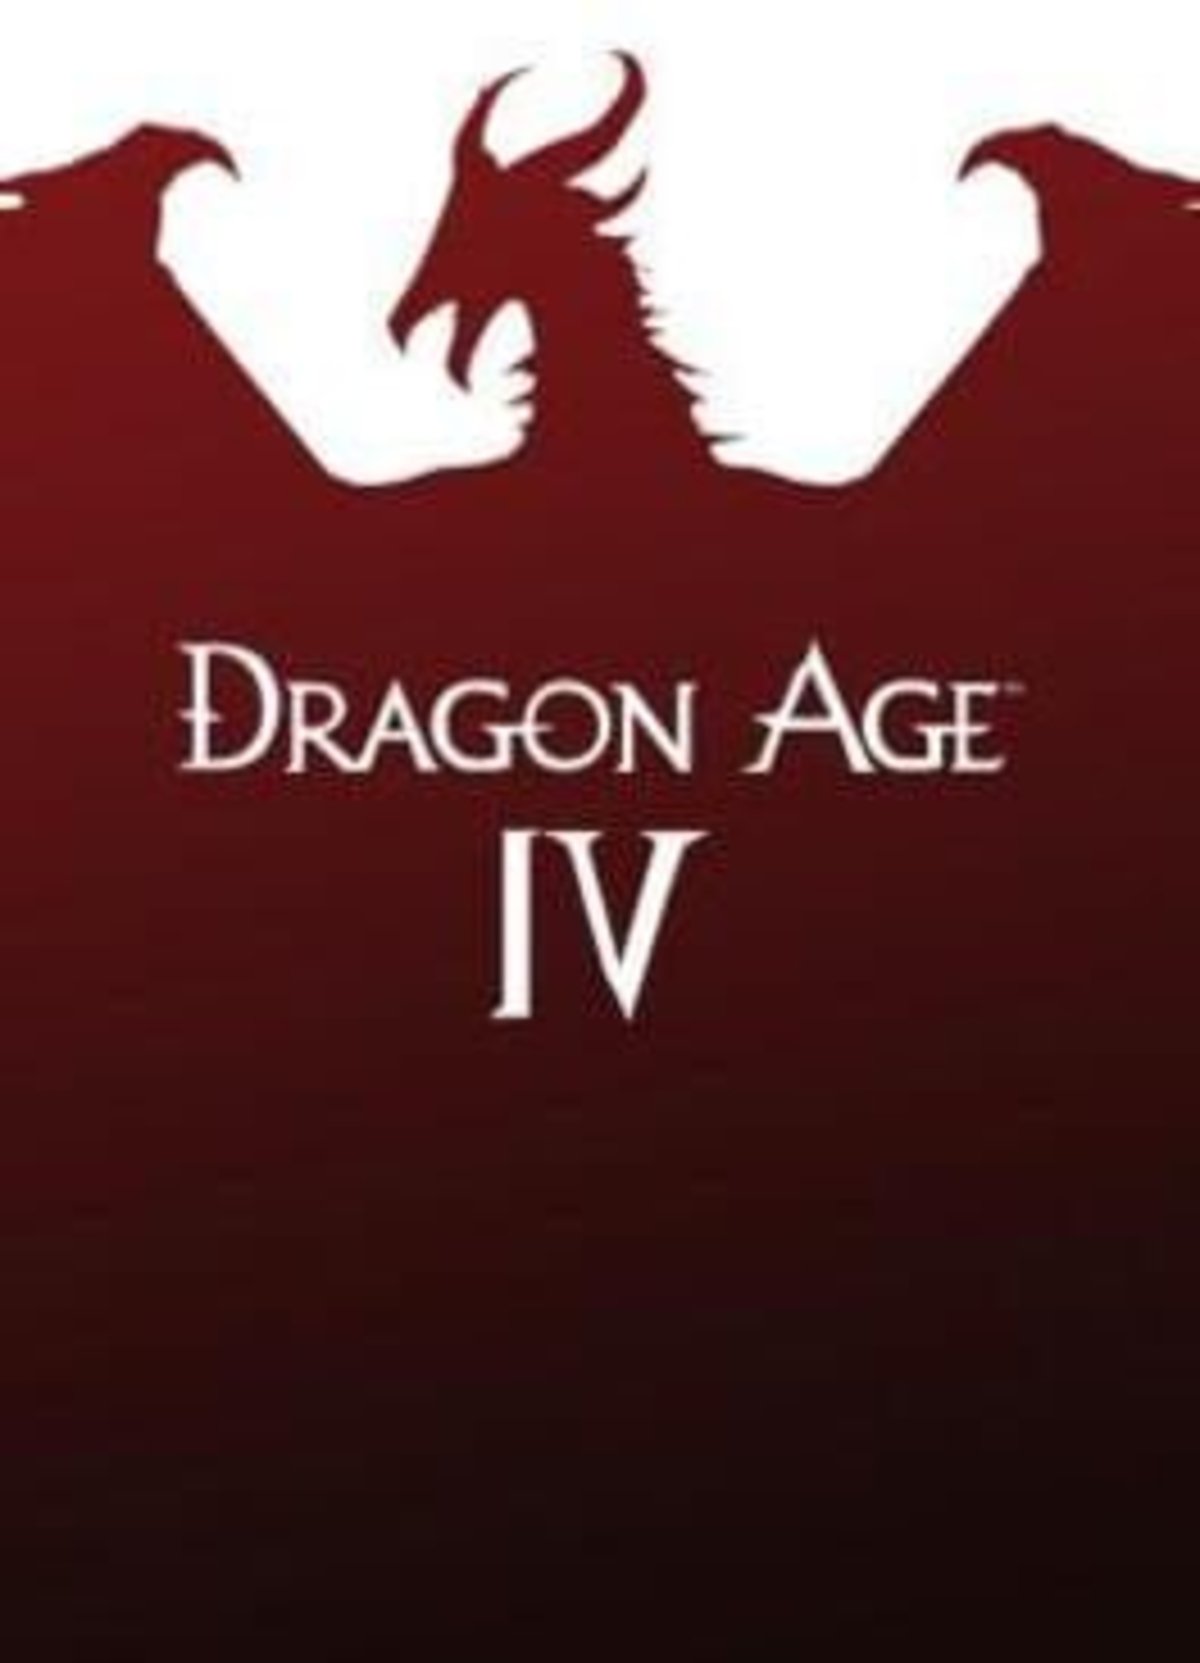 An insider points to the release year of Dragon Age 4